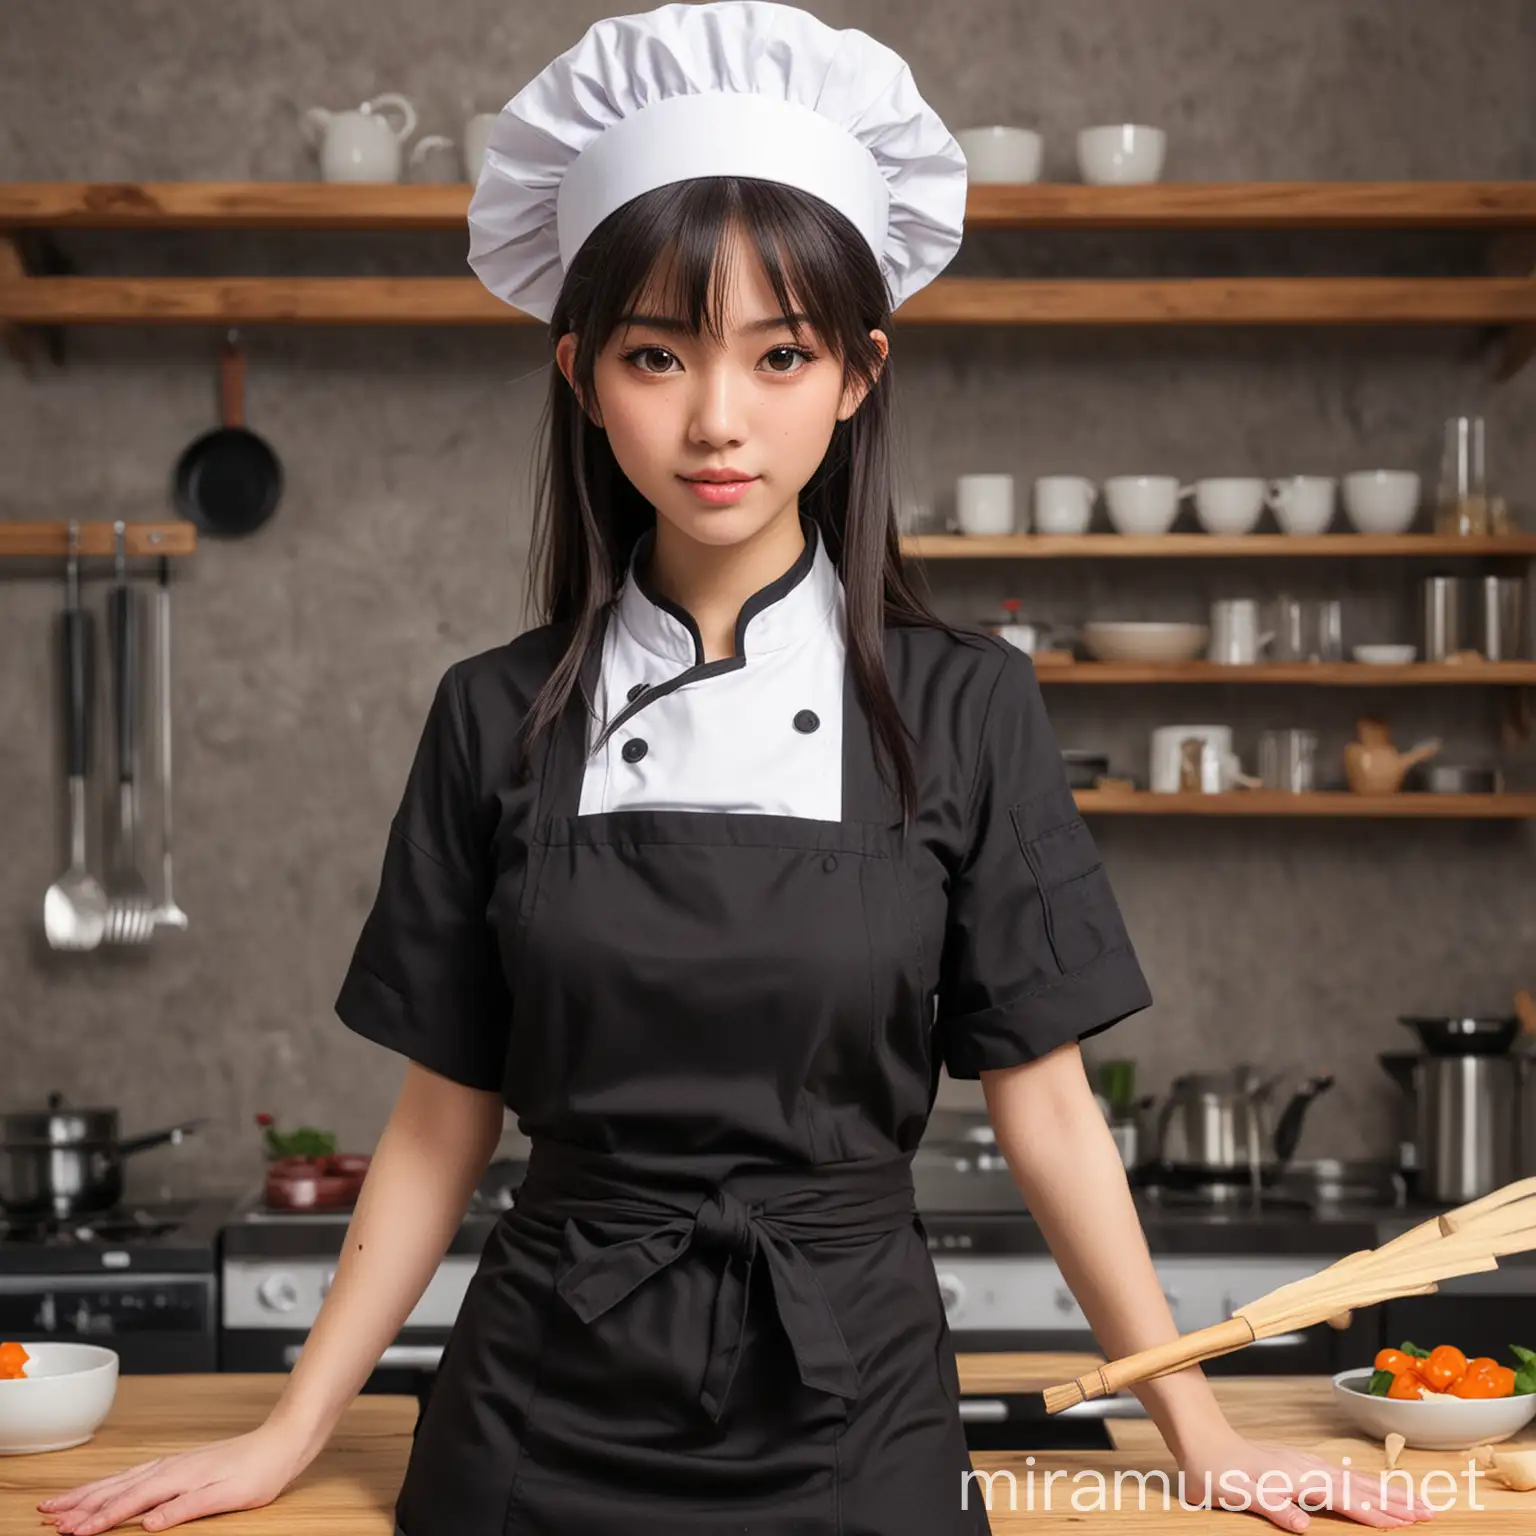 Asian Girl Chef in Black Apron with Hachimaki Anime Style